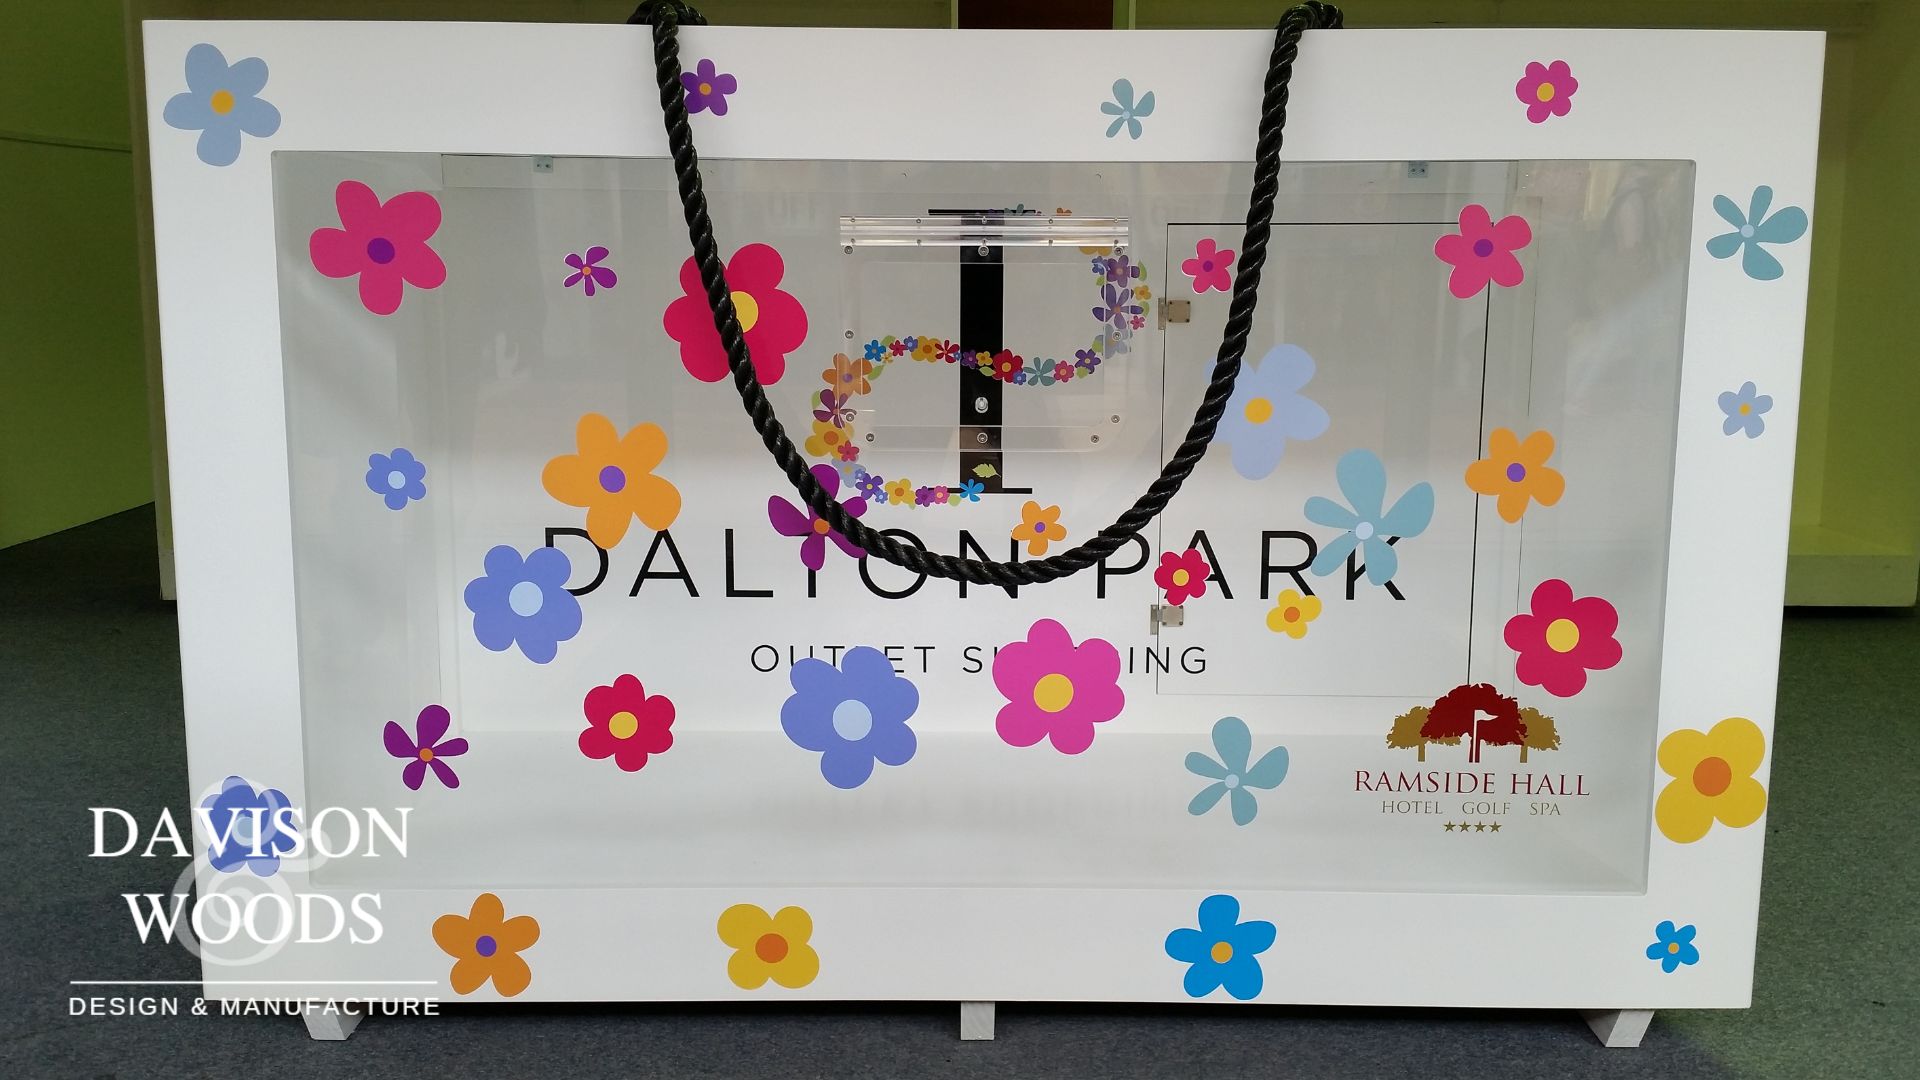 White Dalton Park Display case with glass display window and black rope handles.